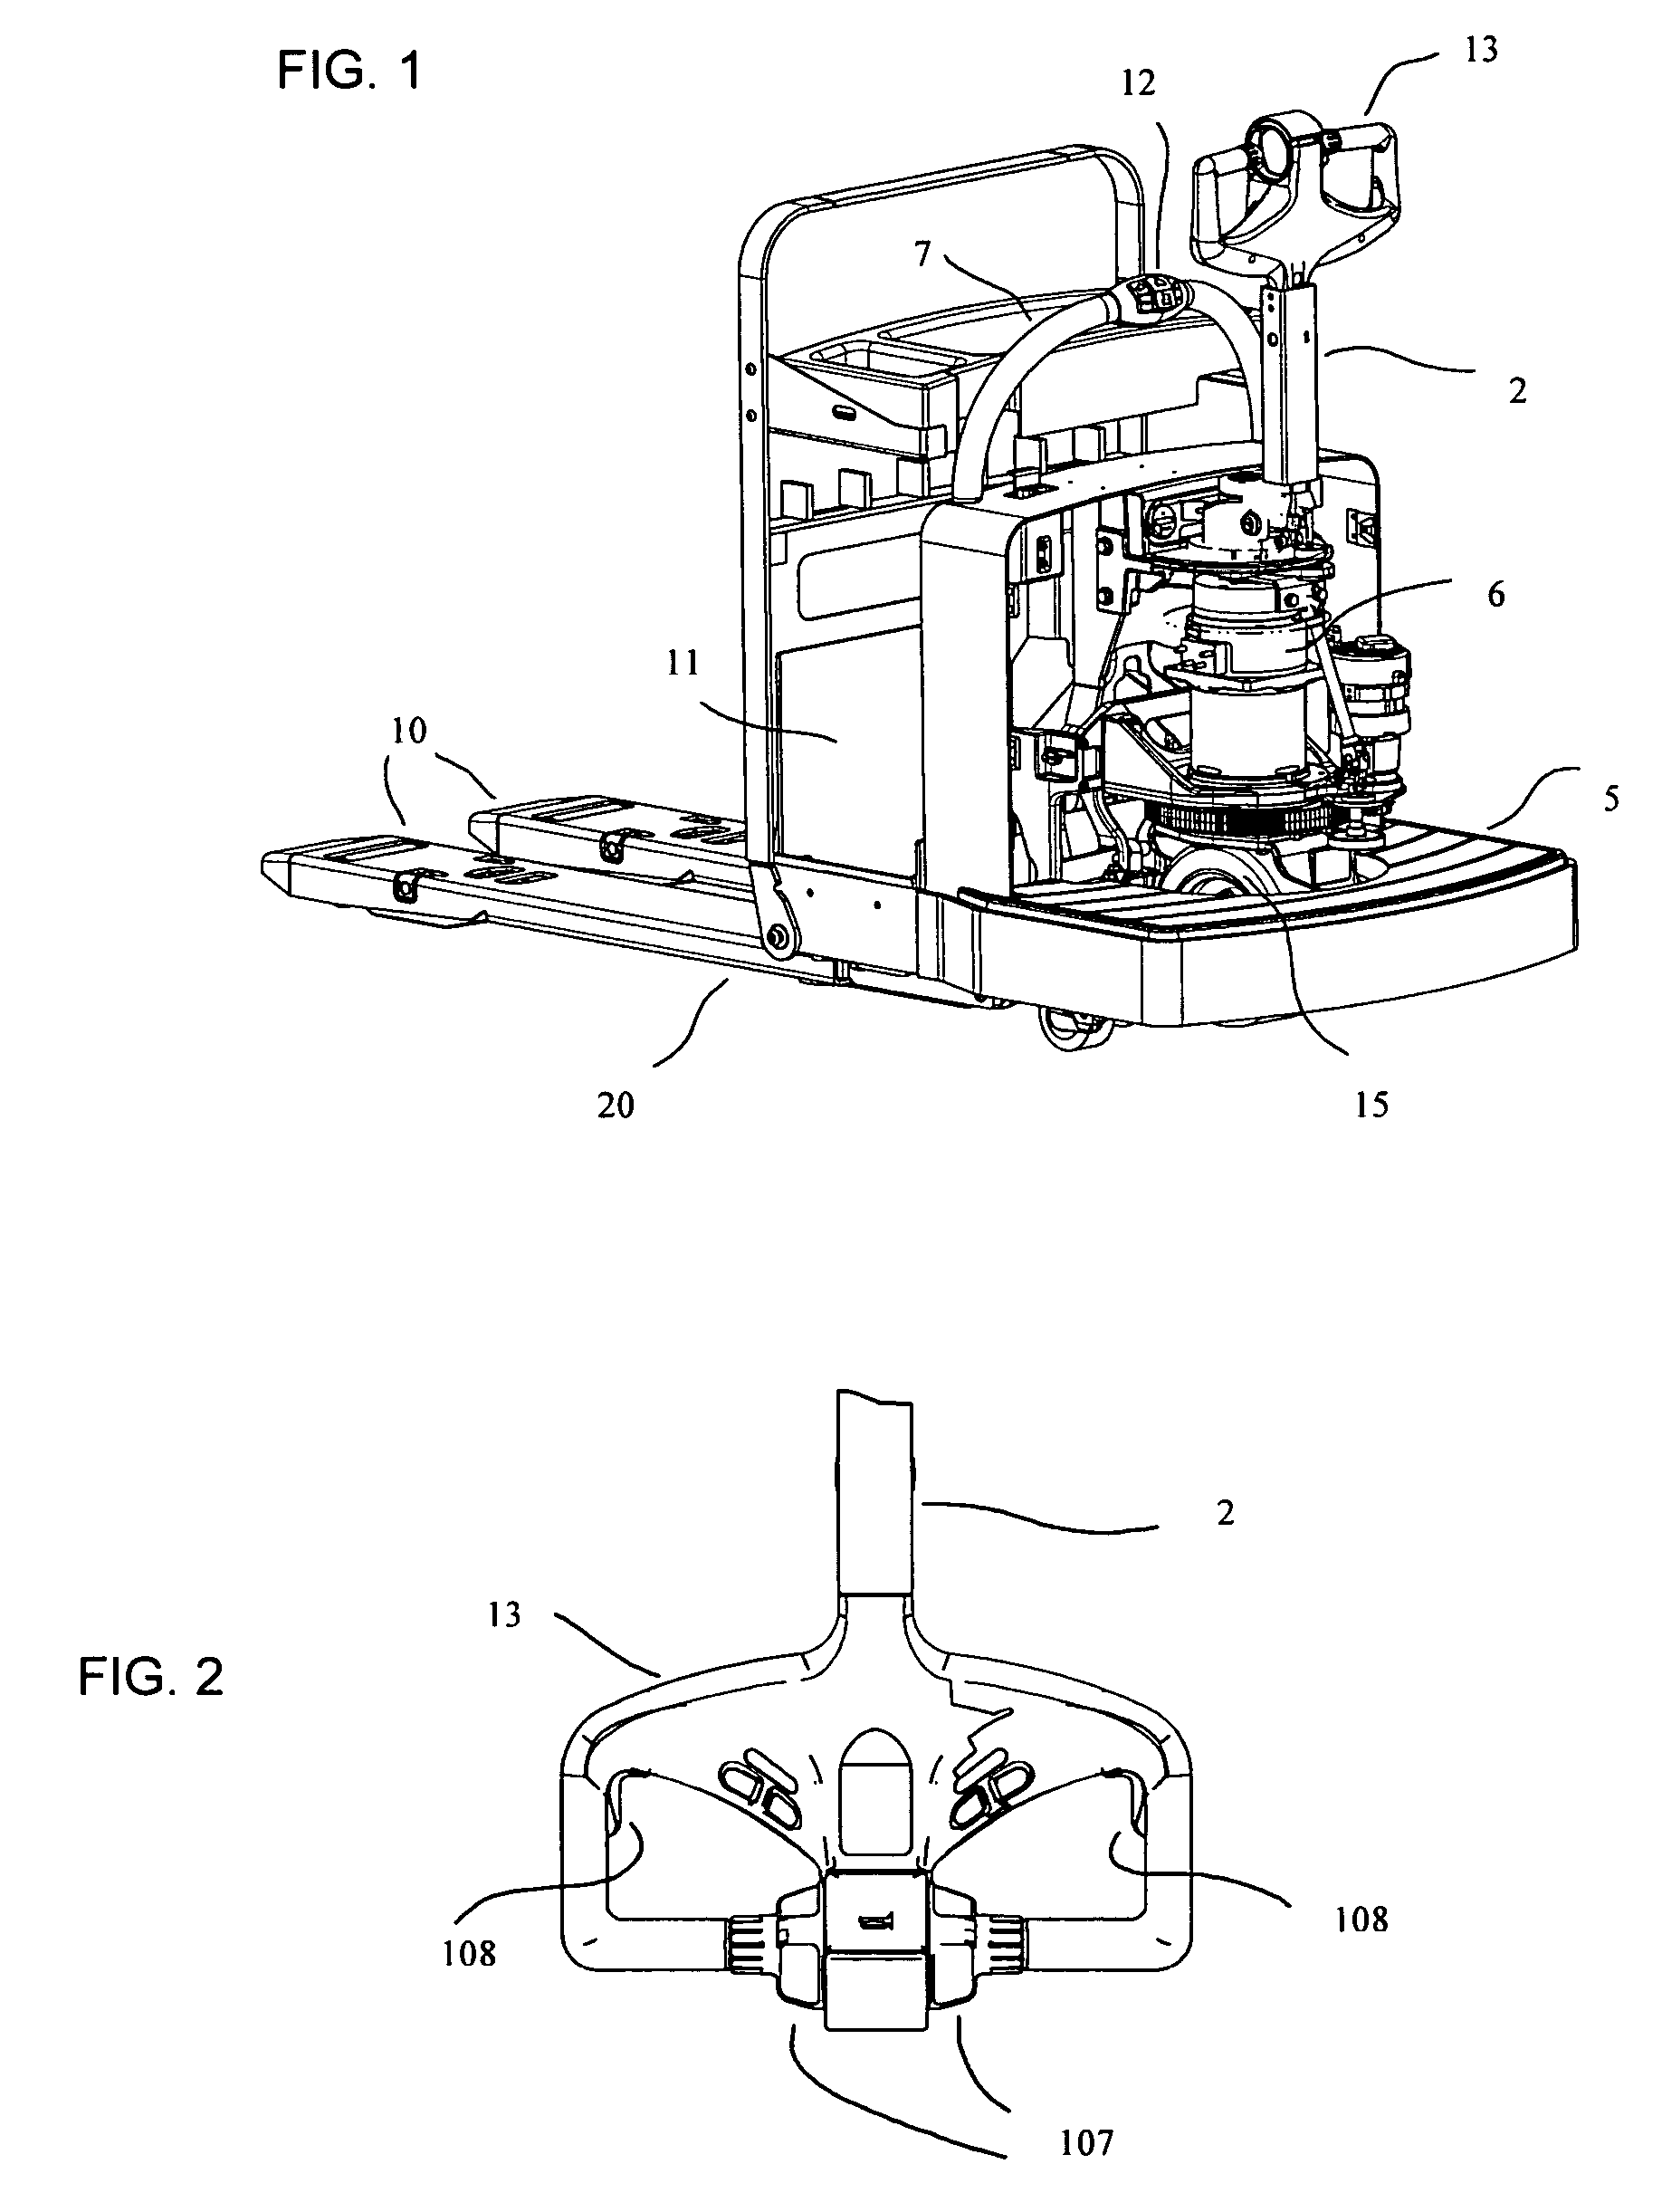 Power assisted steering for motorized pallet truck